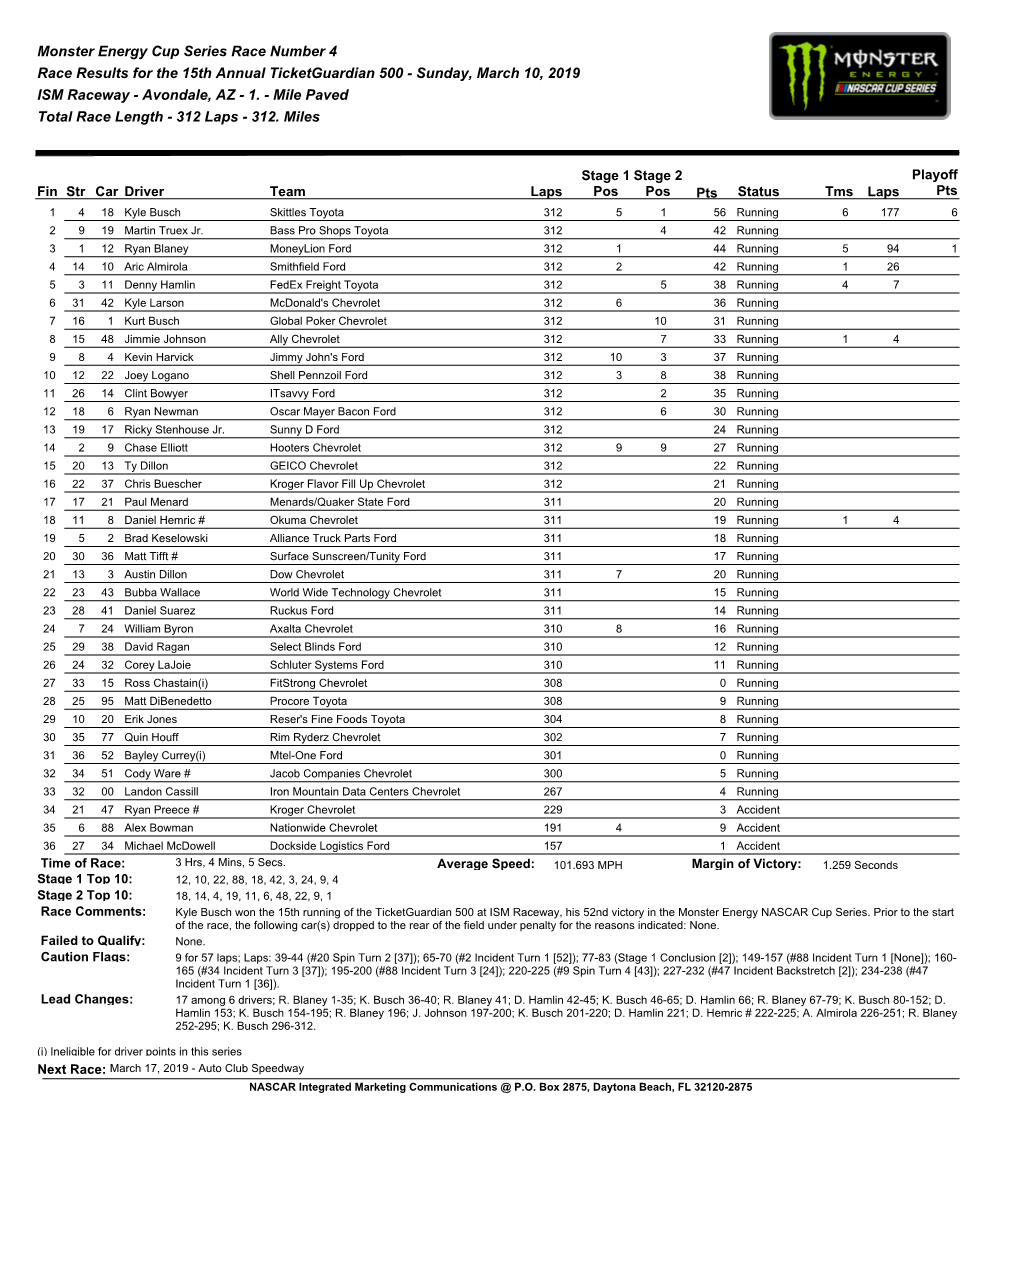 Monster Energy Cup Series Race Number 4 Race Results for the 15Th Annual Ticketguardian 500 - Sunday, March 10, 2019 ISM Raceway - Avondale, AZ - 1